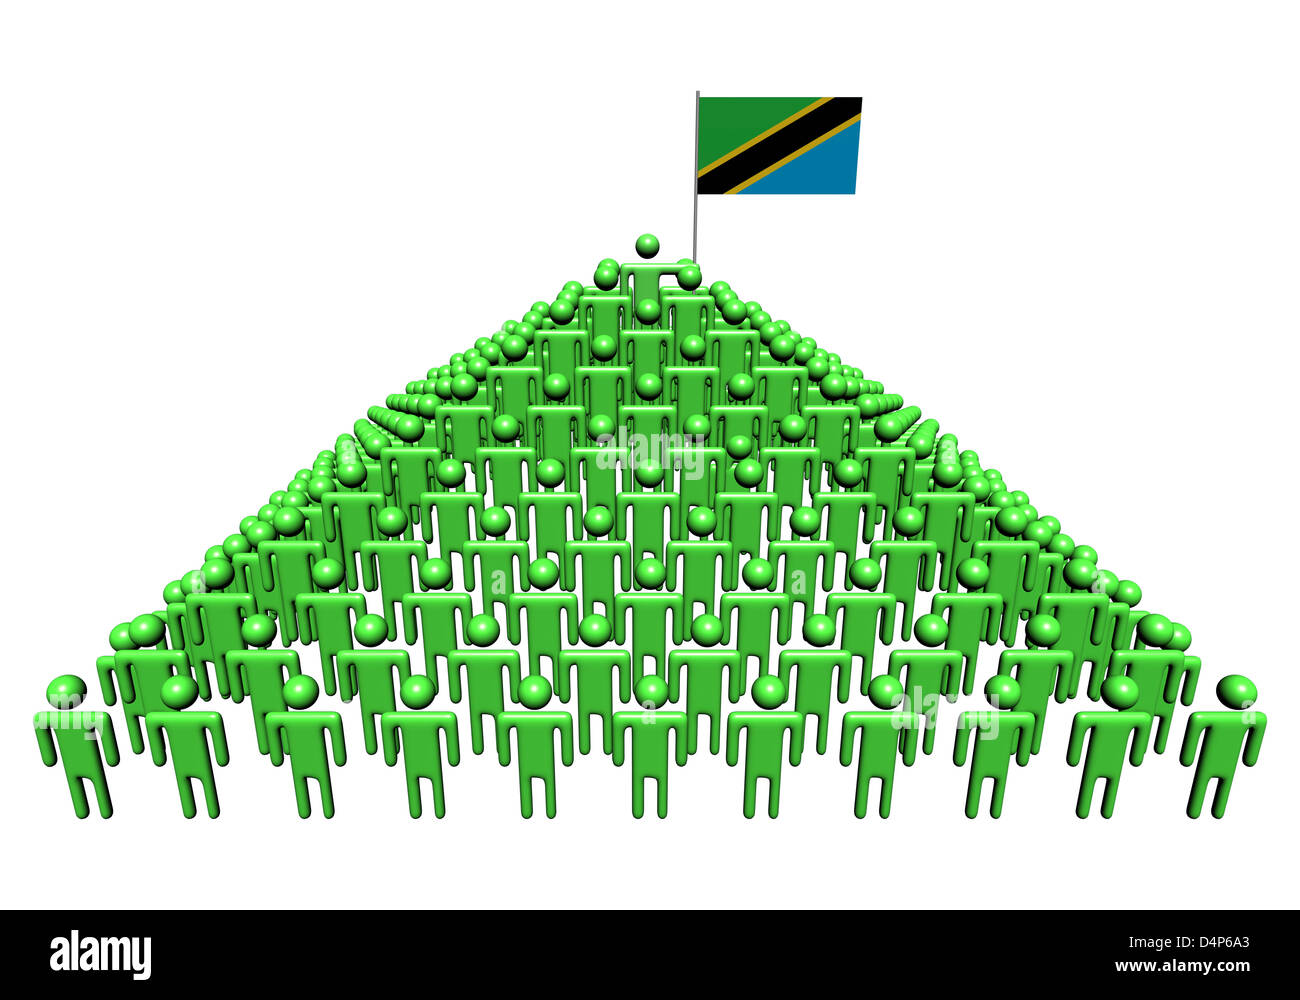 Pyramid of abstract people with Tanzania flag illustration Stock Photo